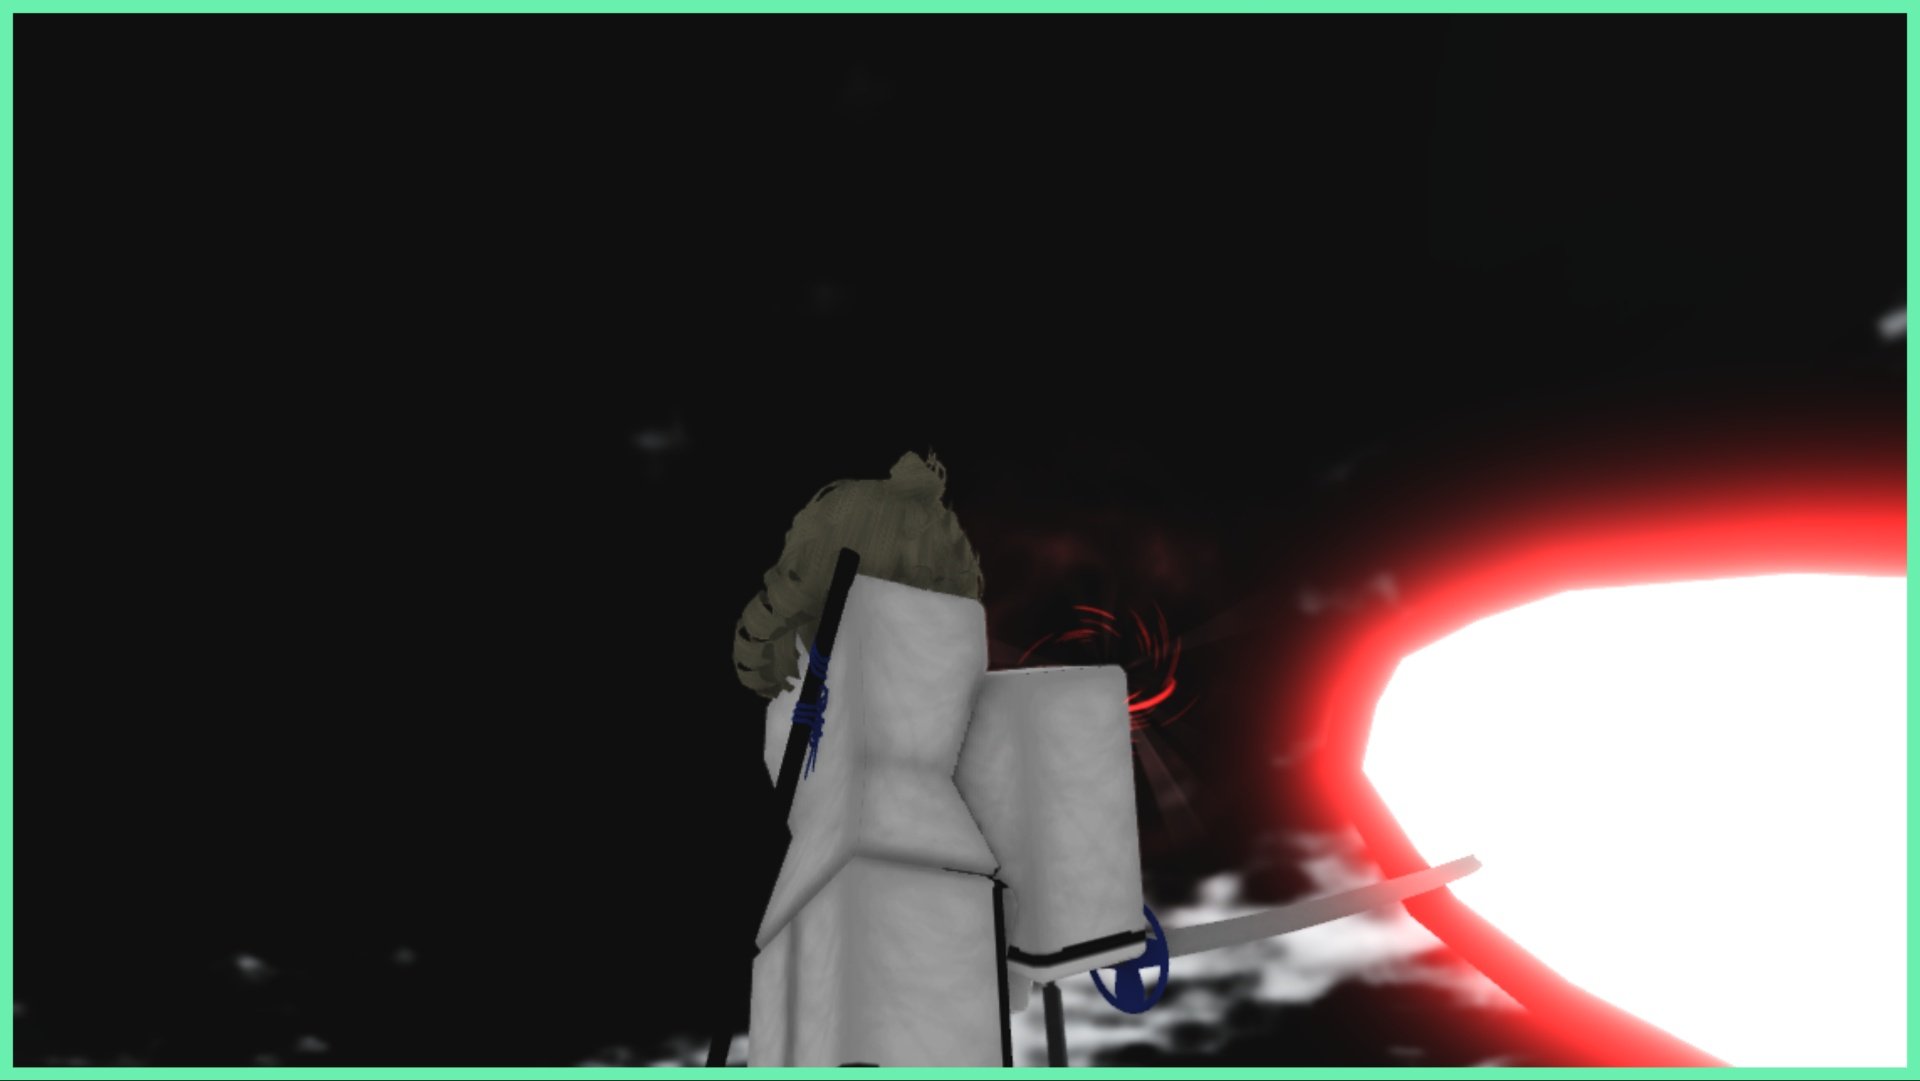 Feature image for our Gran Rey Cero Type Soul Guide which shows the back of an arrancar player wearing an all white outfit with grey hair down to their shoulders. They are firing the standard Cero move which is a red laster beam that emits from their front